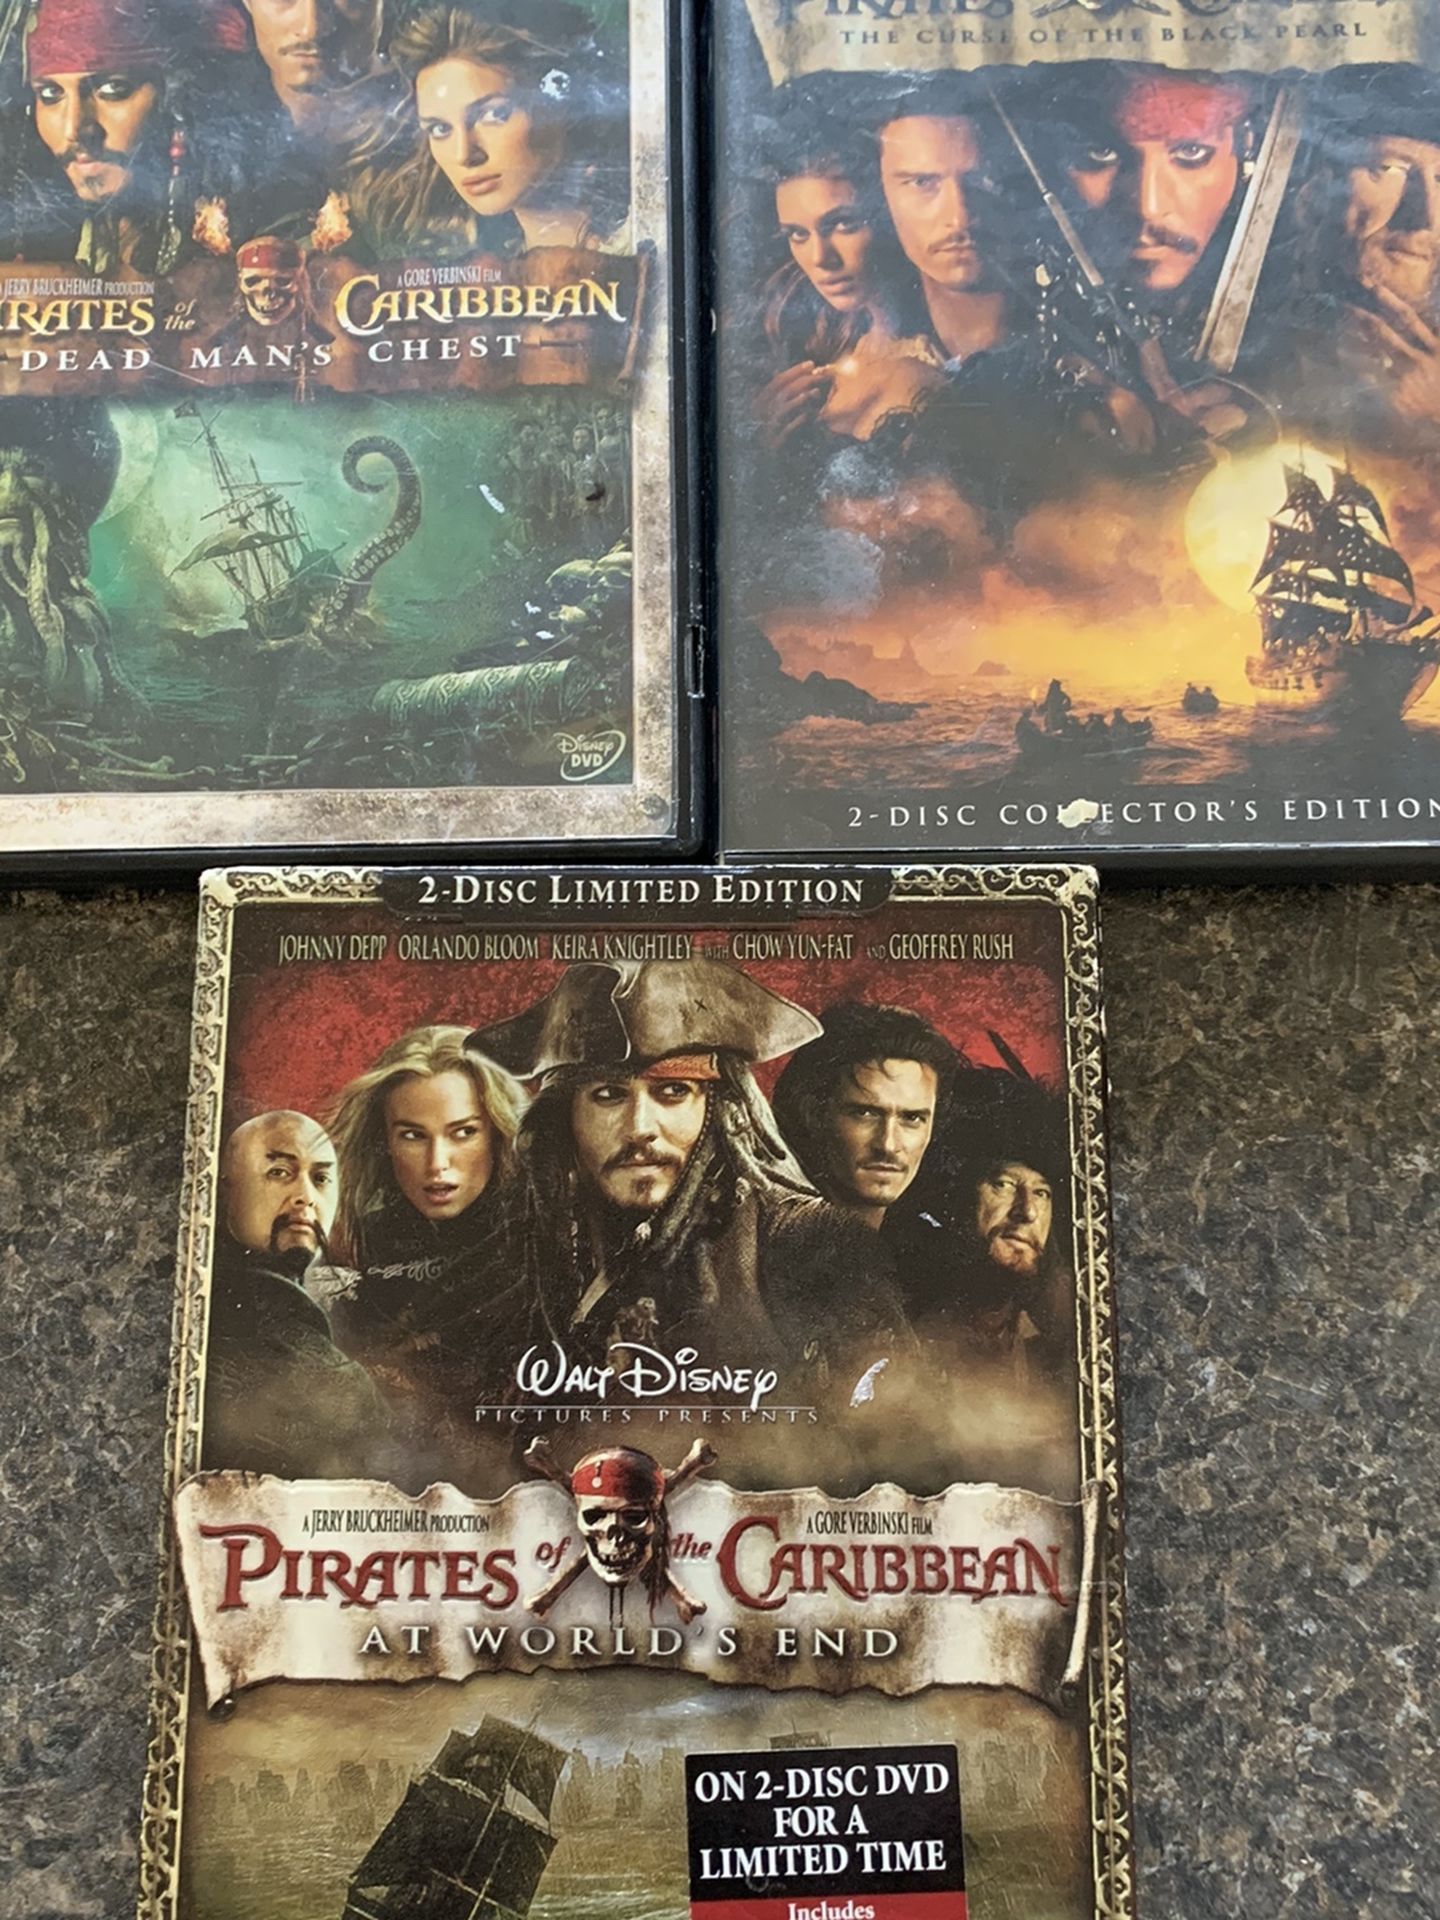 Lord of the Rings Or Pirates Of The Carribean Dvd Set